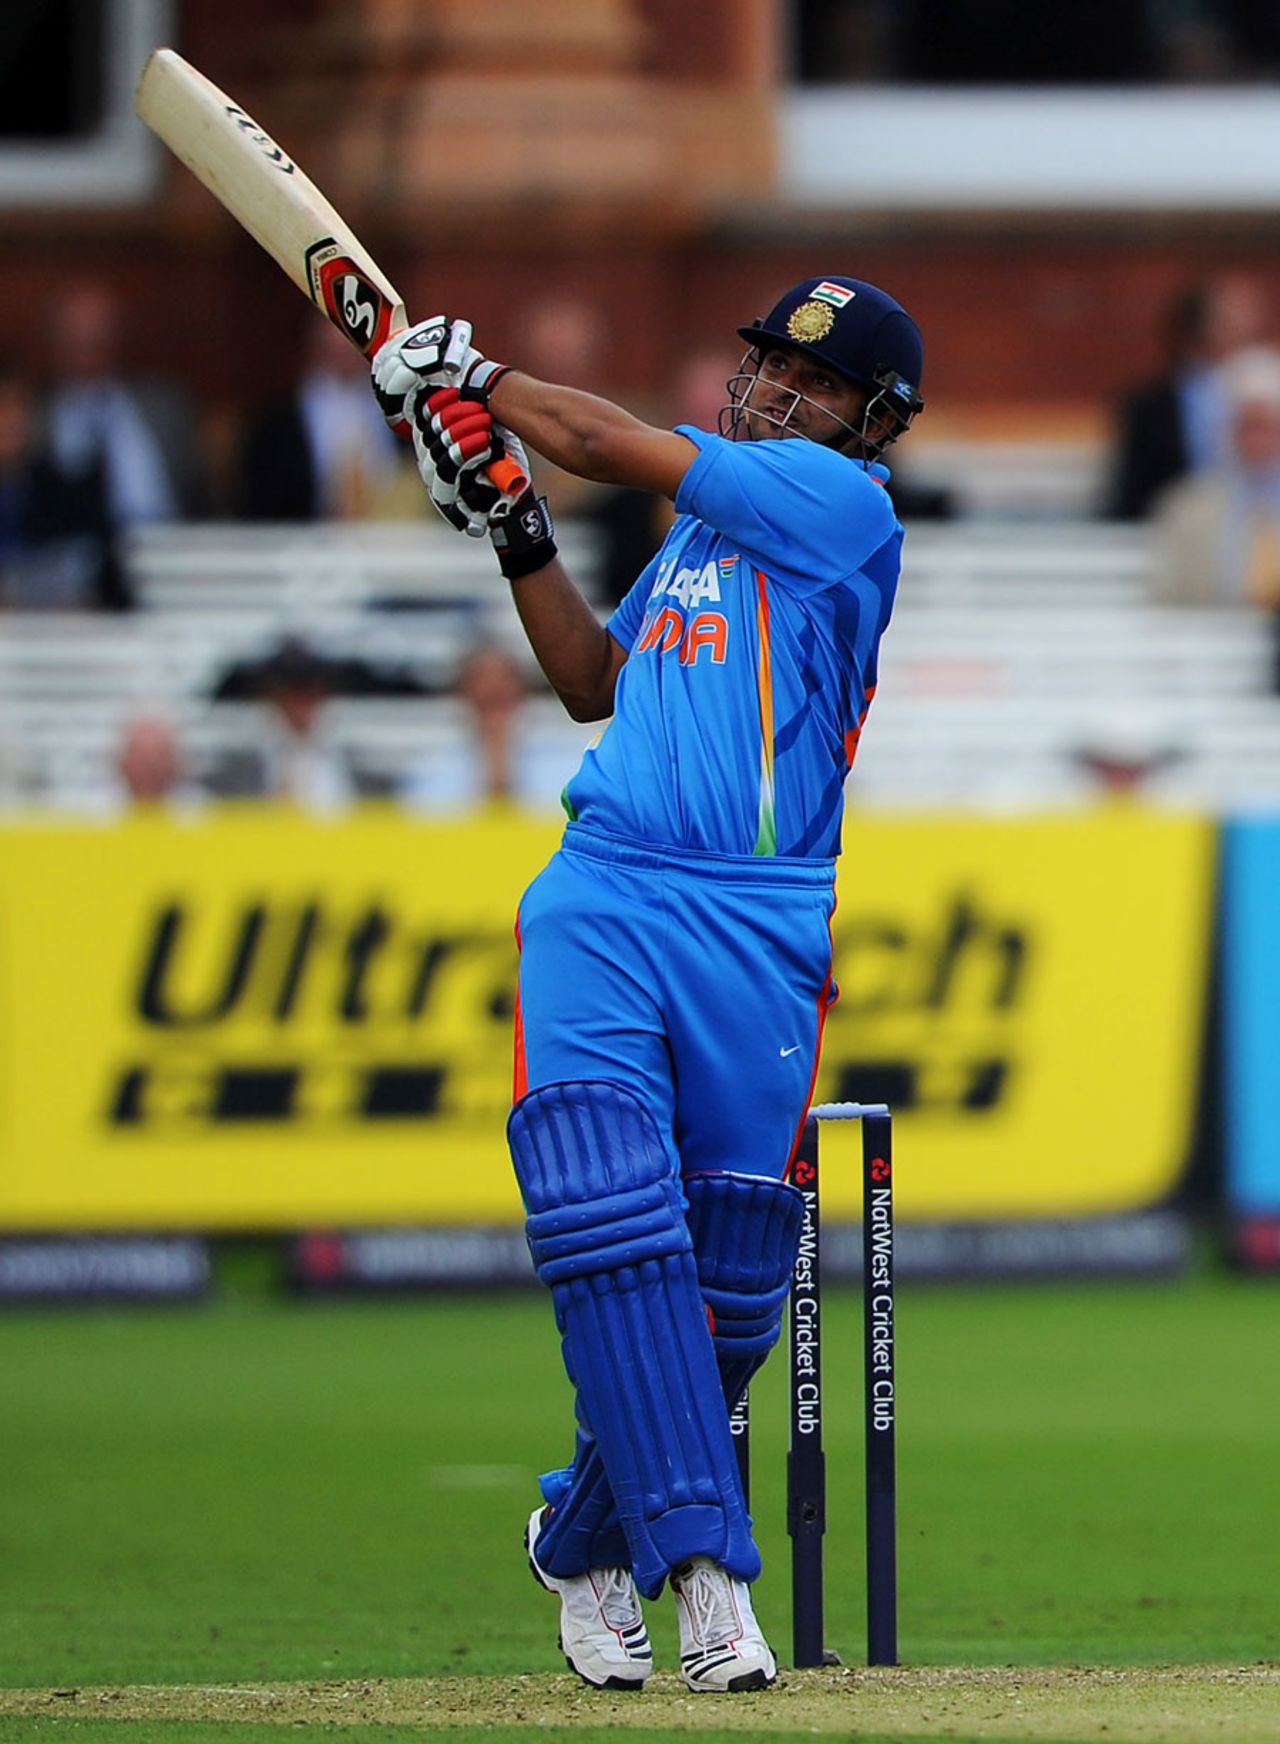 Suresh Raina goes over midwicket, England v India, 4th ODI, Lord's, September 11, 2011